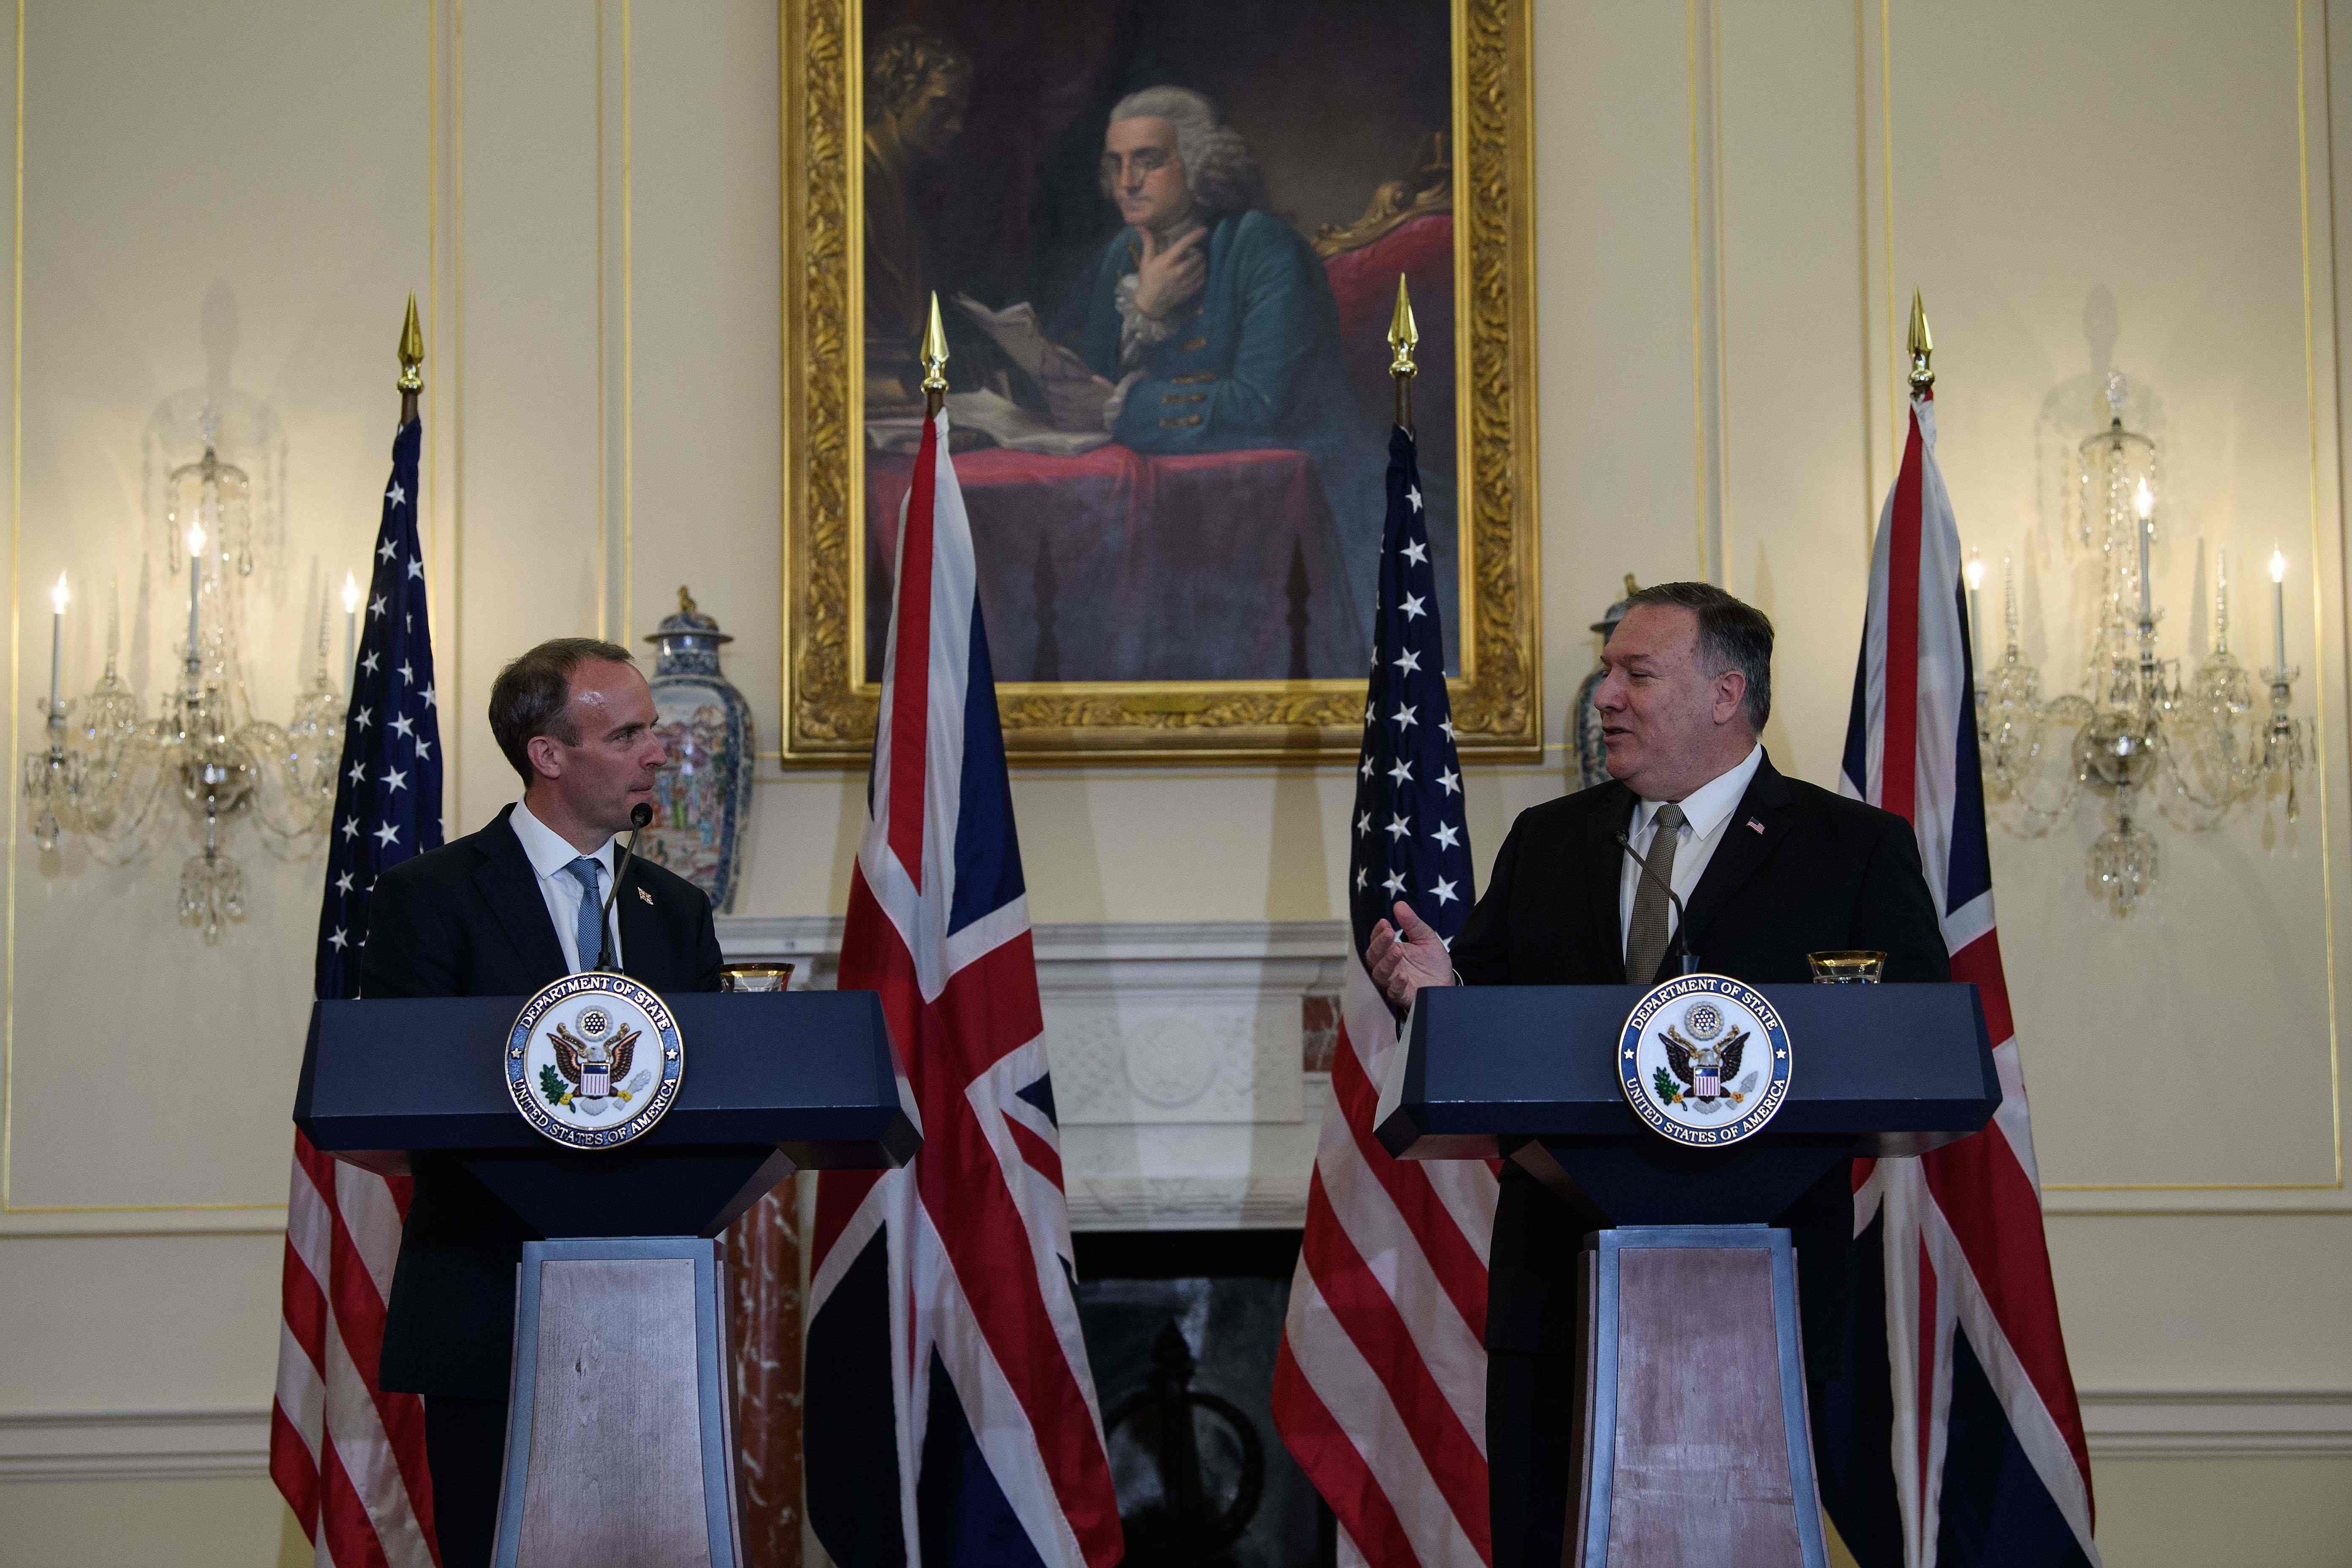 US Secretary of State Mike Pompeo (R) speaks at a press conference with British Foreign Secretary Dominic Raab at the State Department in Washington